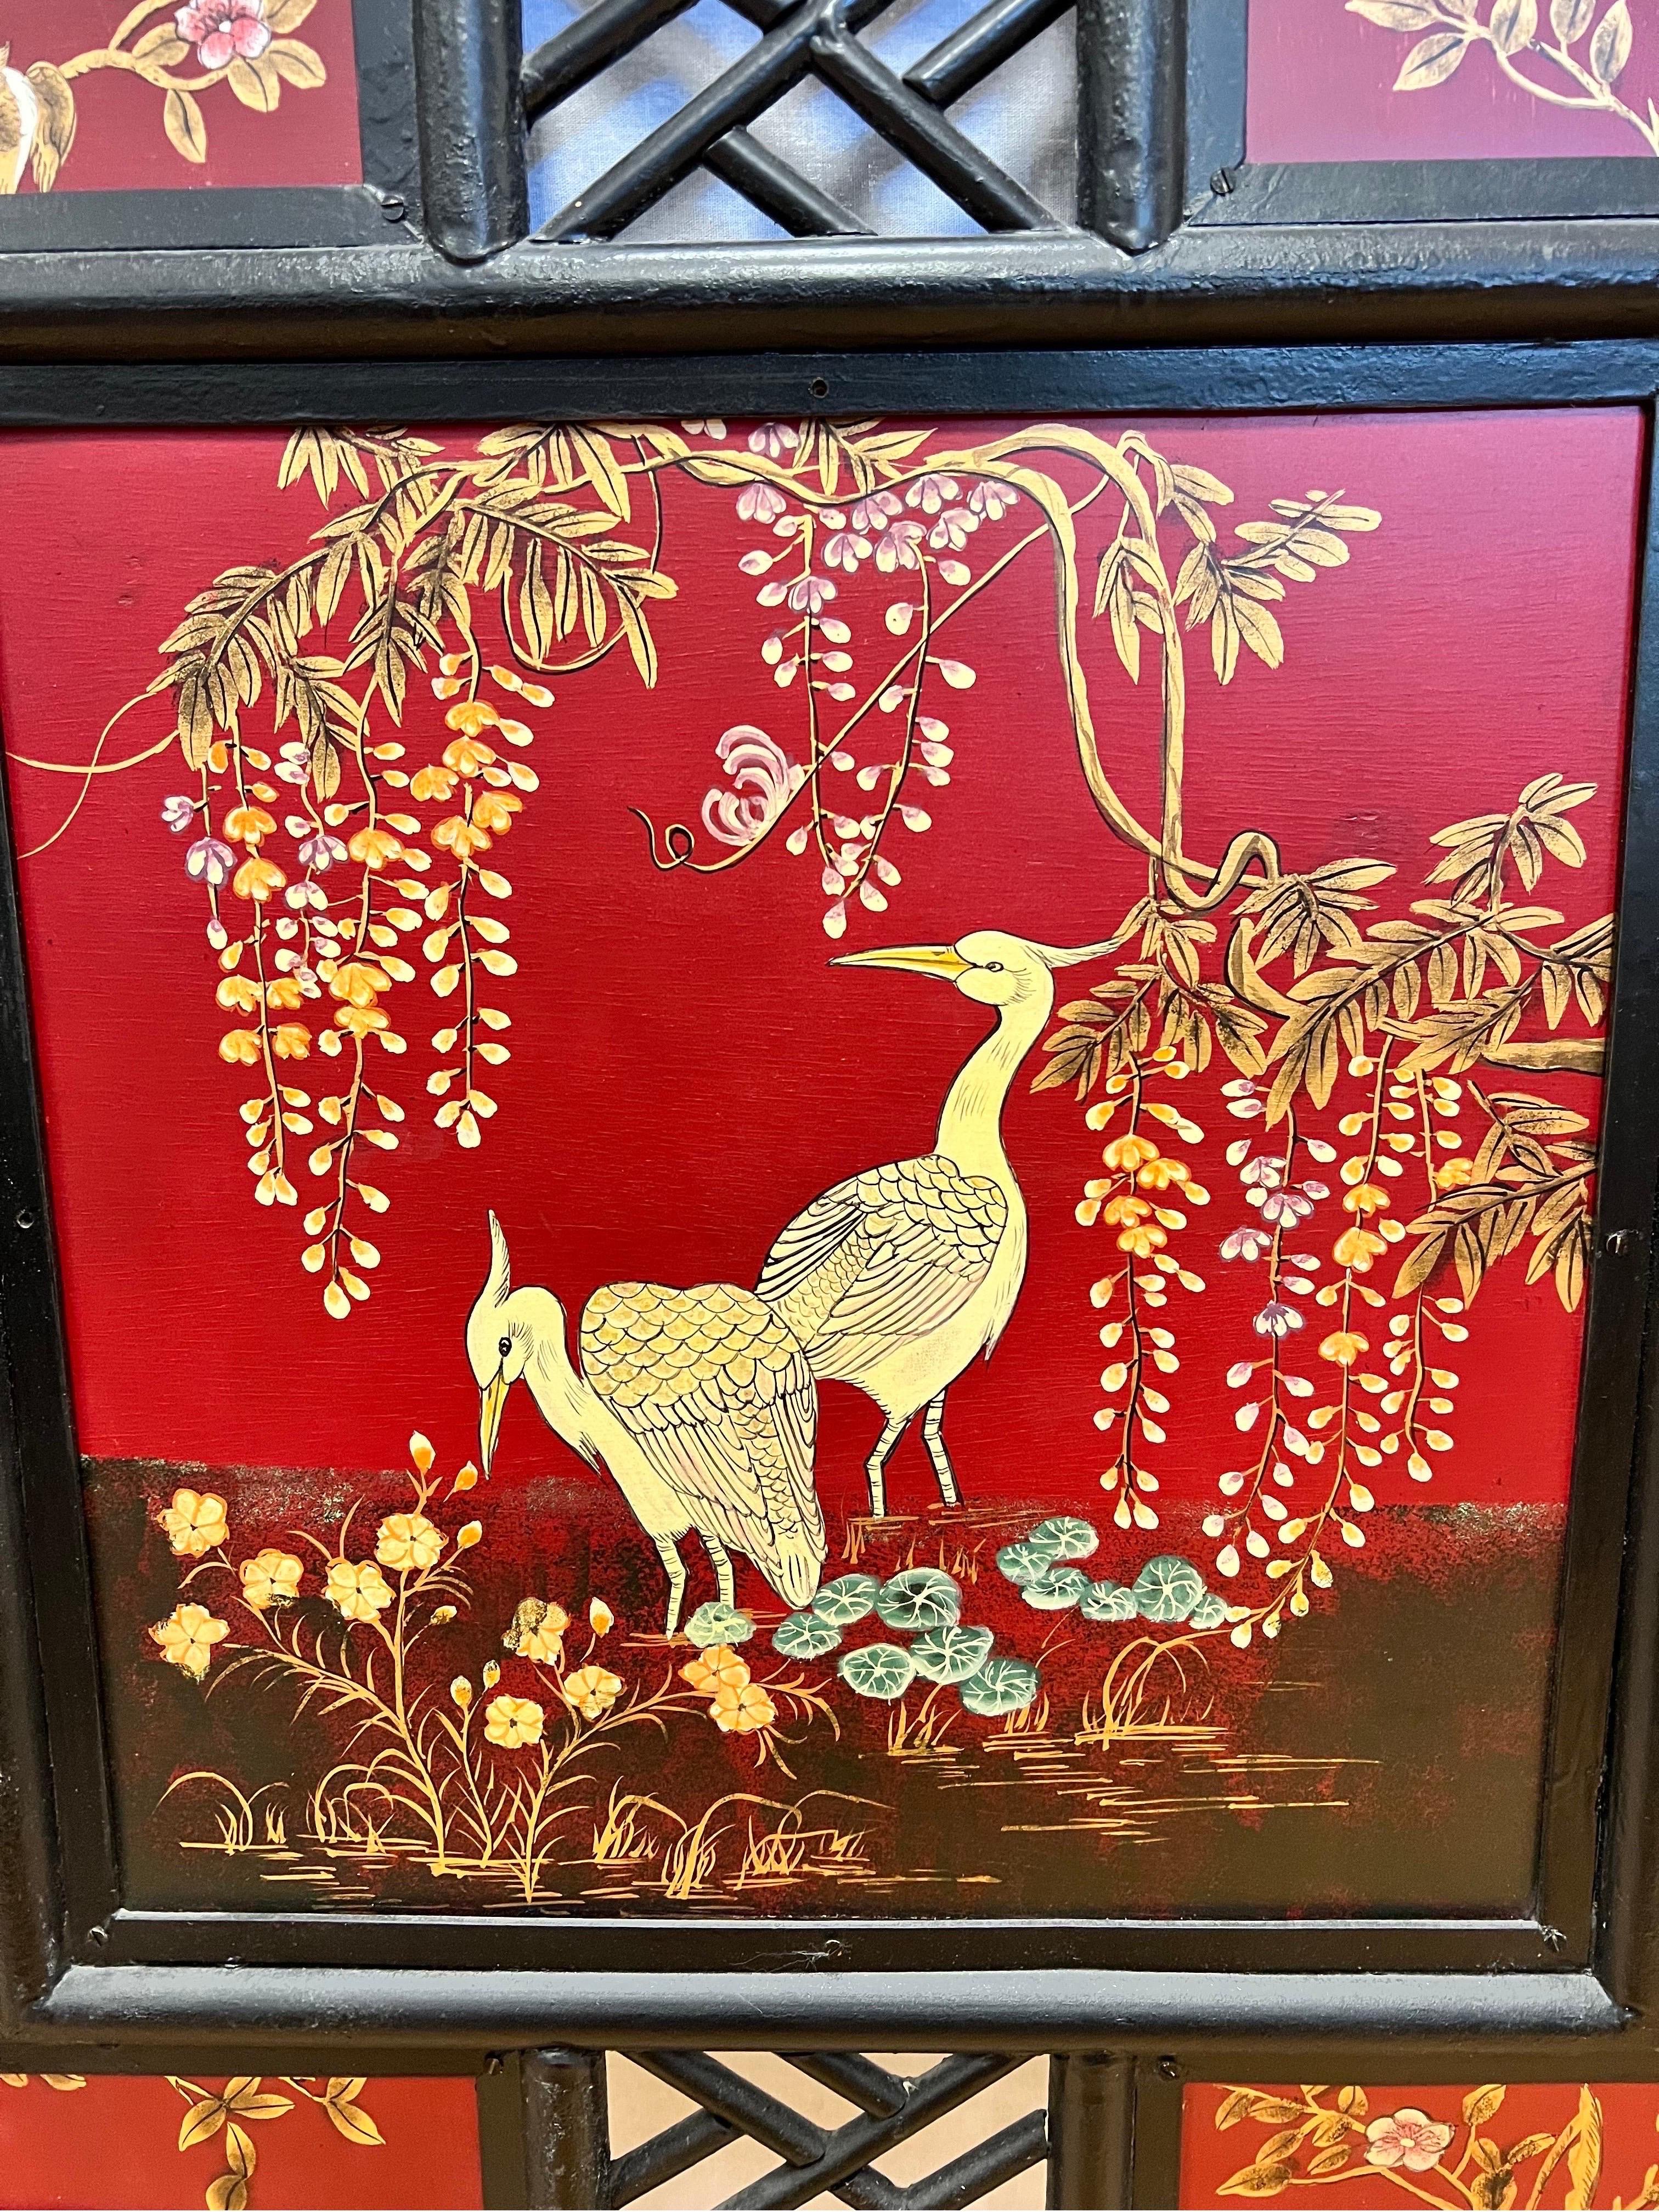 Exquisite Chinese fireplace screen with a black lacquered bamboo frame inset with panels of handpainted cranes and flowers on a brilliant red background.